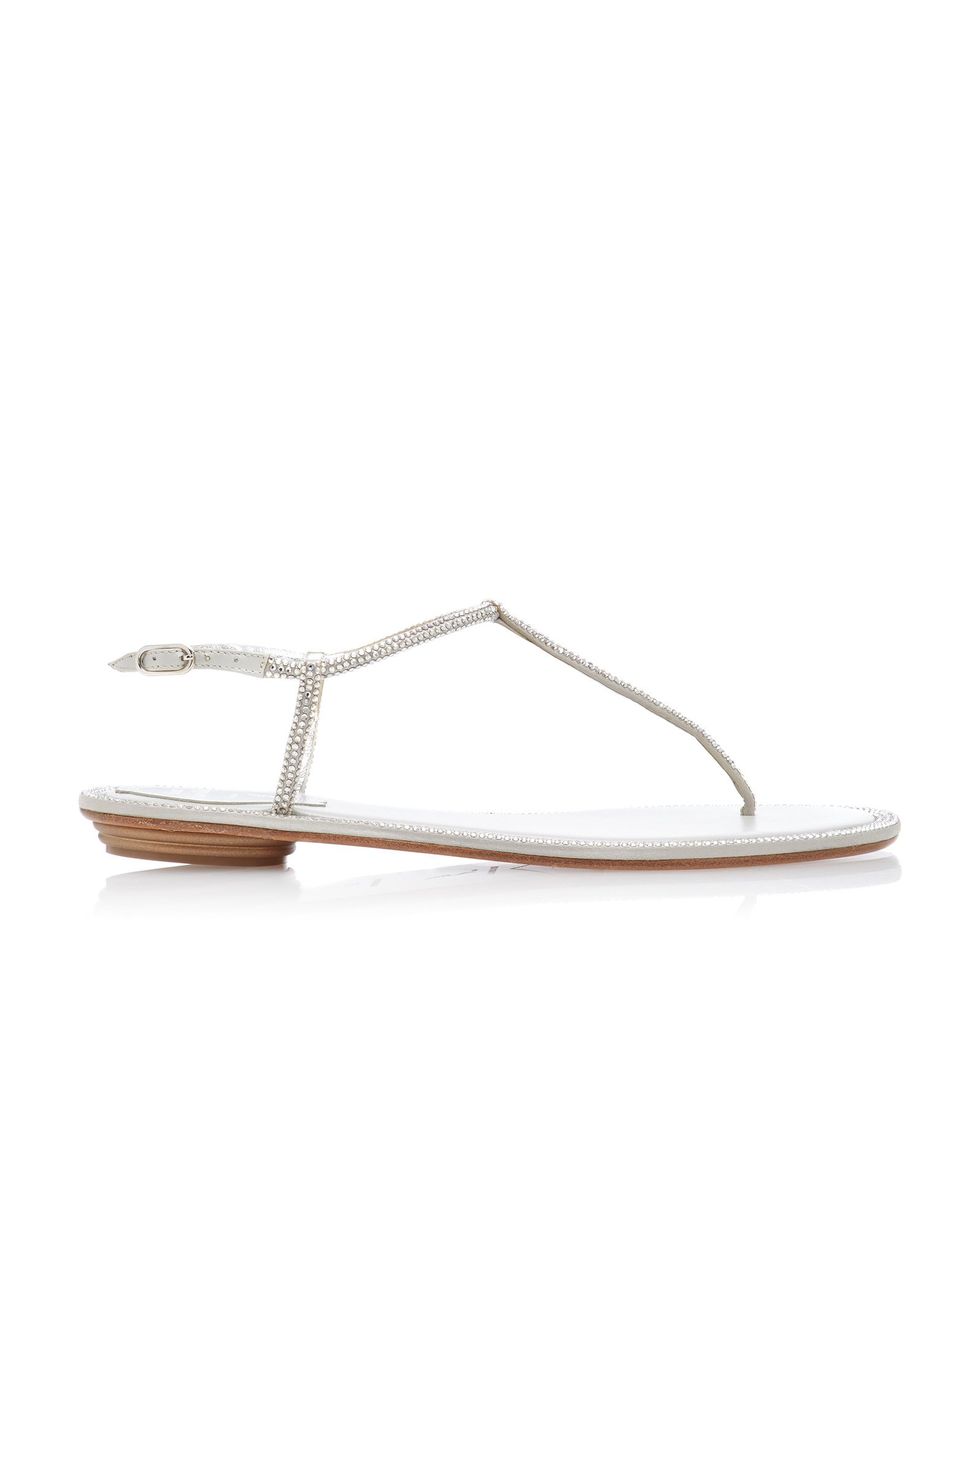 22 Beach Wedding Shoes - These Are the Best Bridal Shoes for Your Beach ...